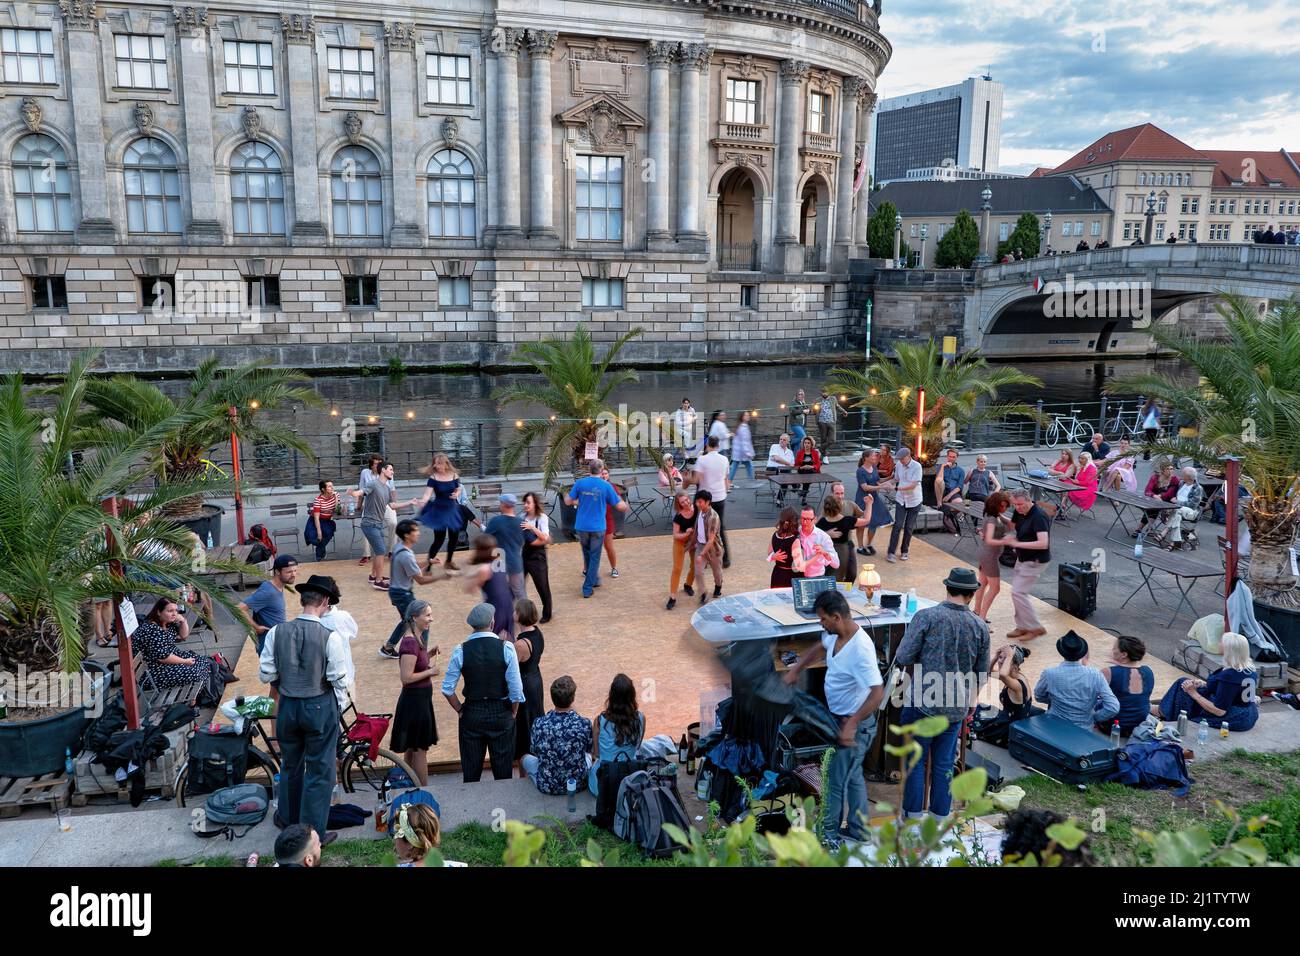 Berlin, Germany - August 8, 2021: People dancing at Strandbar Mitte open air beach bar dance floor in the city center with Bode Museum at river Spree Stock Photo